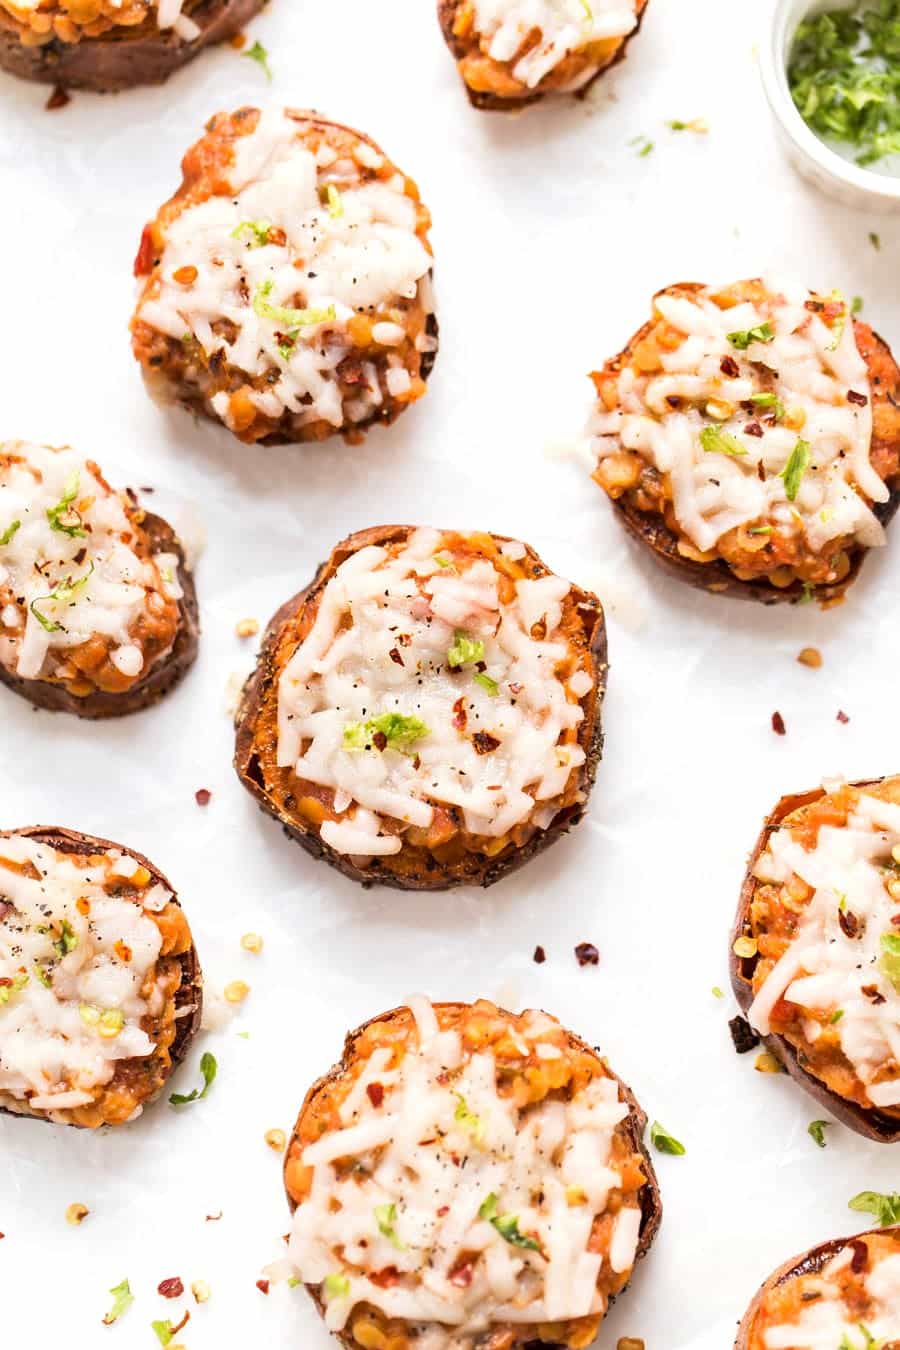 The HEALTHIEST twist on pizza ever! These SWEET POTATO PIZZA BITES are perfectly roasted, then topped with a lentil bolognese for a little perfect appetizer!